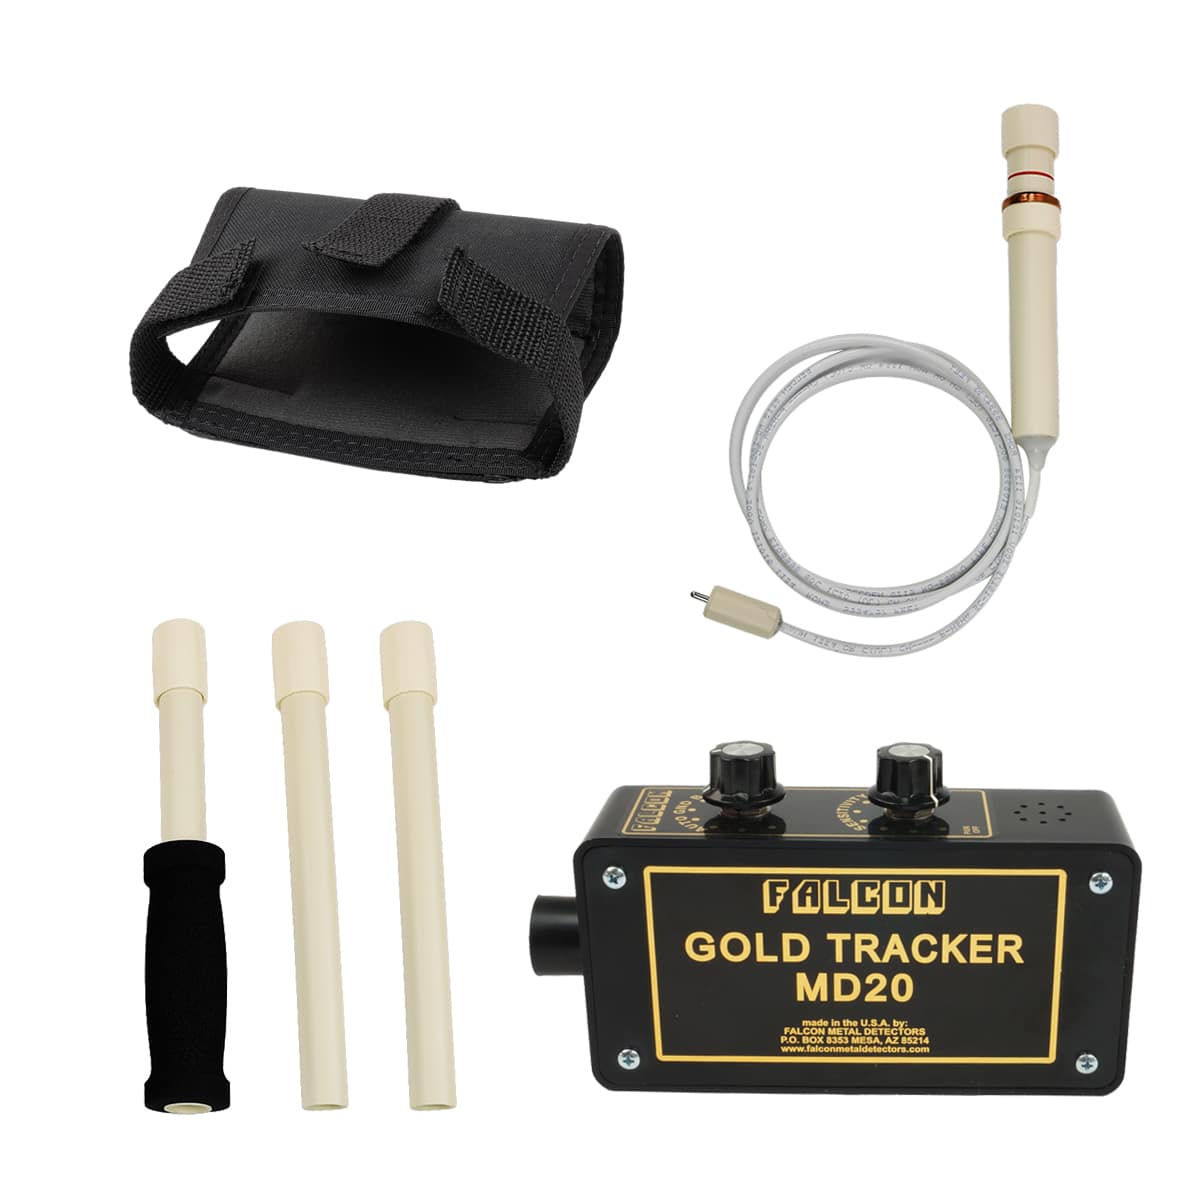 Falcon Gold Tracker MD20 Metal Detector with 3-Piece Handle with Foam Grip & Holster